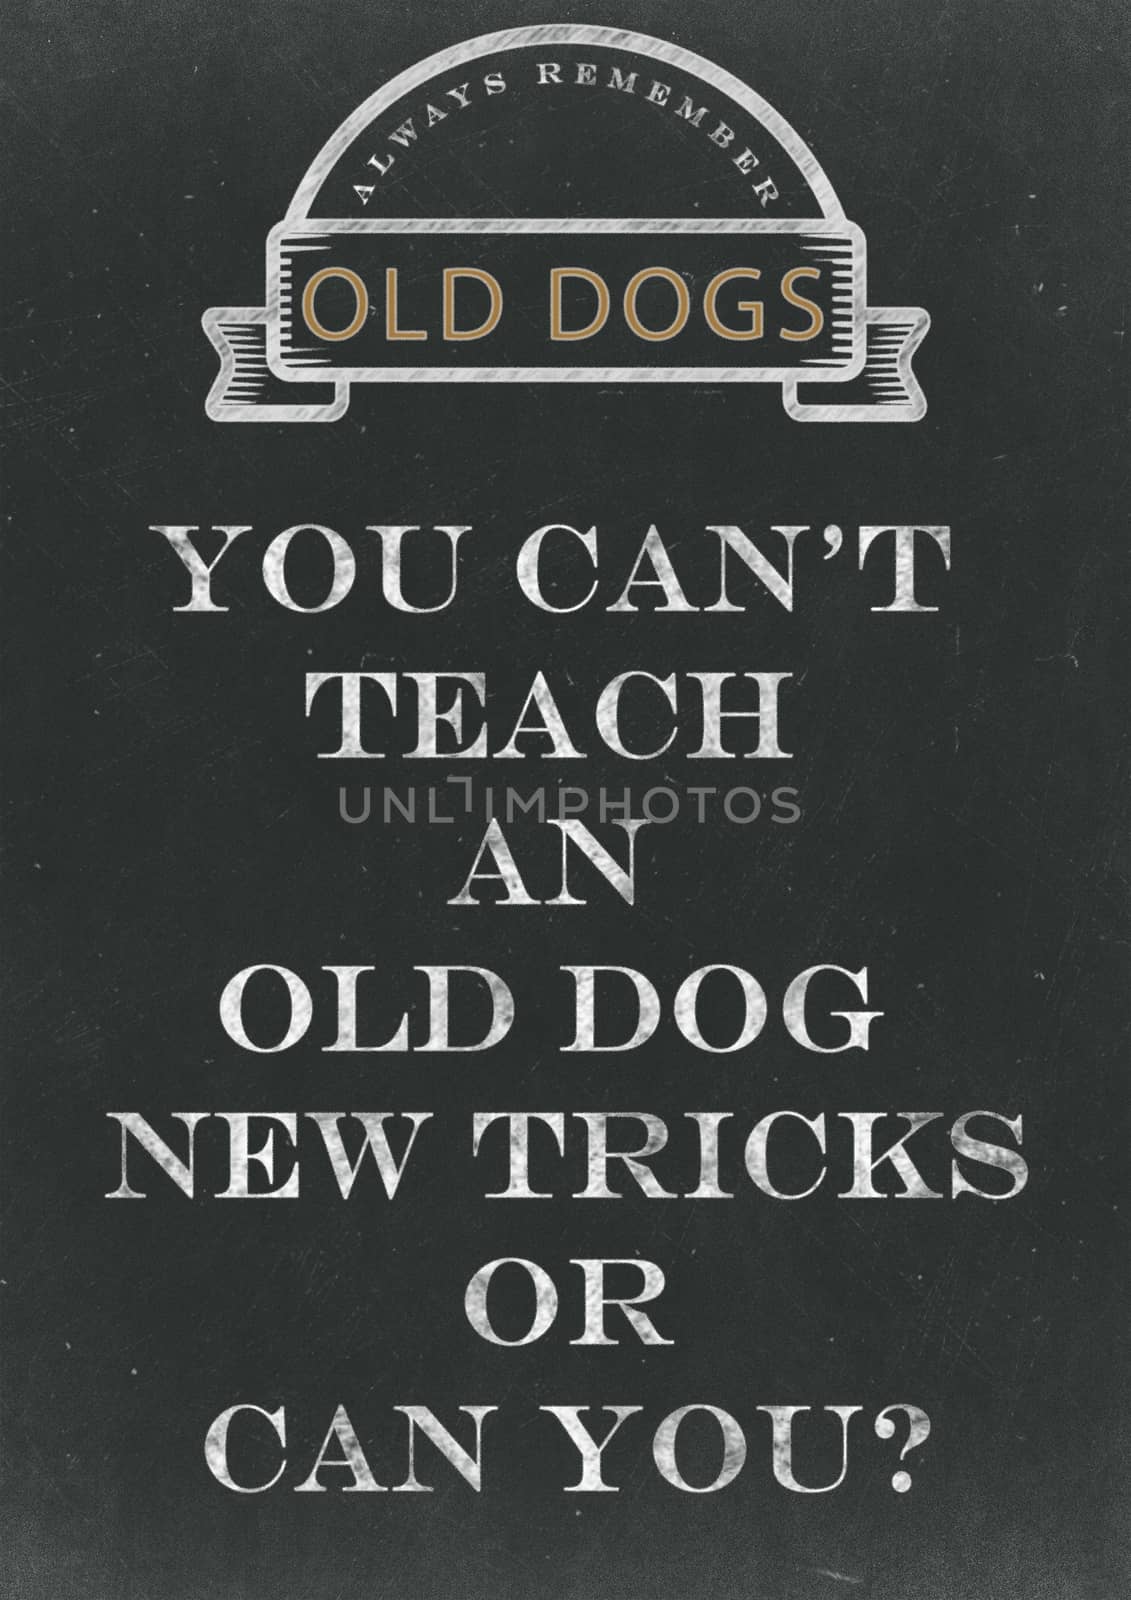  You Can't Teach An Old Dog New Tricks Hand Written On A Chalkboard